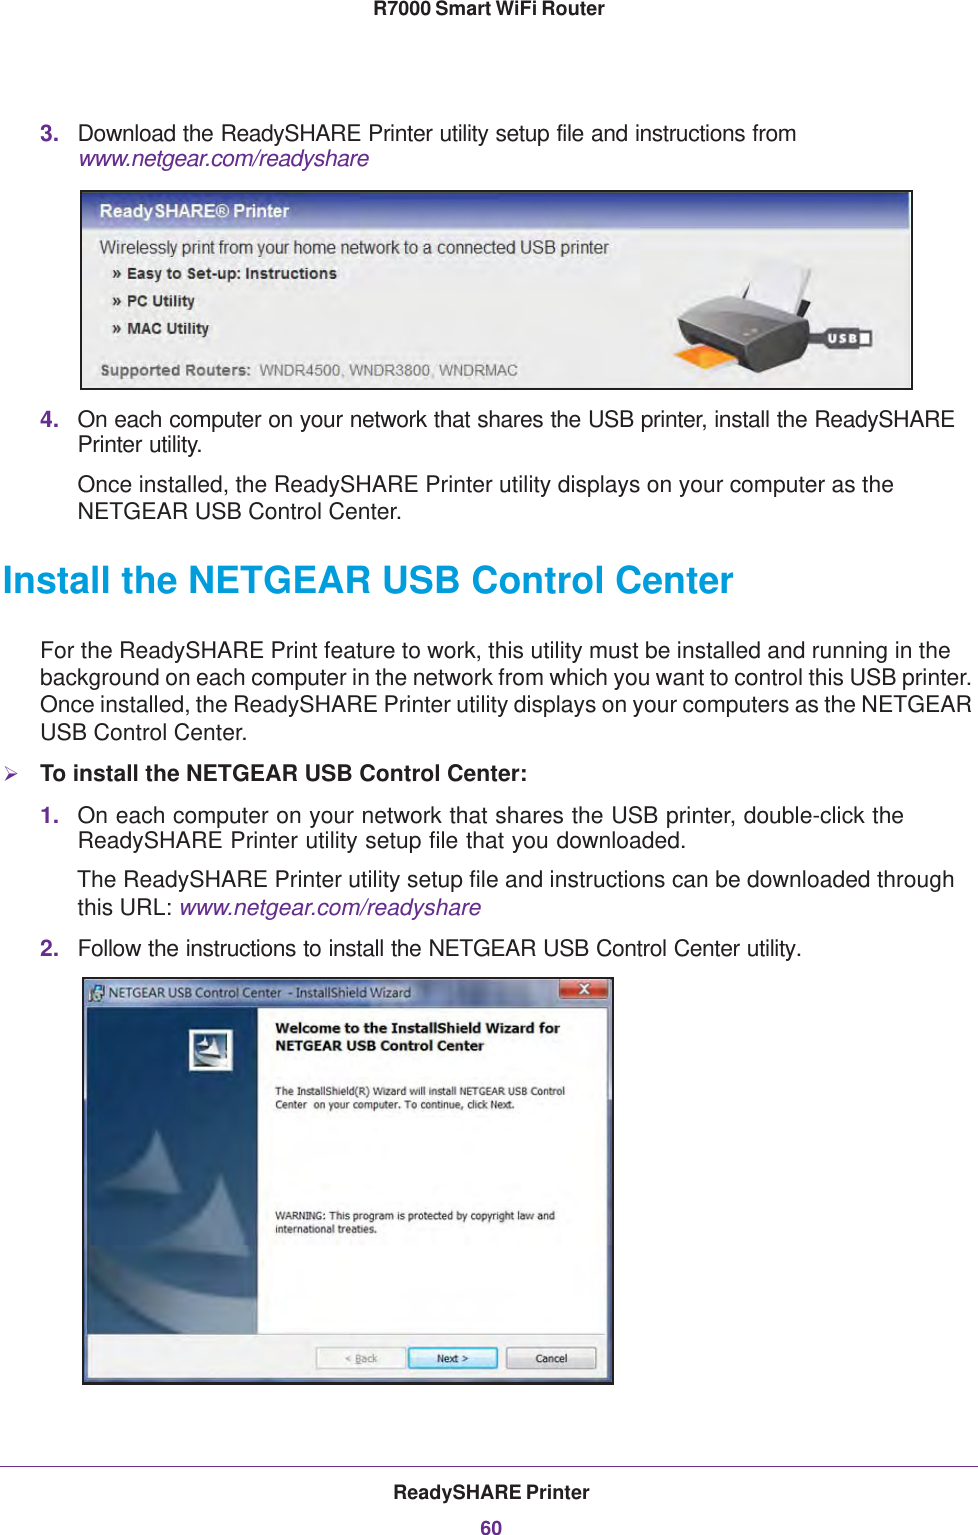 ReadySHARE Printer60R7000 Smart WiFi Router 3. Download the ReadySHARE Printer utility setup file and instructions from www.netgear.com/readyshare4. On each computer on your network that shares the USB printer, install the ReadySHARE Printer utility.Once installed, the ReadySHARE Printer utility displays on your computer as the NETGEAR USB Control Center. Install the NETGEAR USB Control CenterFor the ReadySHARE Print feature to work, this utility must be installed and running in the background on each computer in the network from which you want to control this USB printer. Once installed, the ReadySHARE Printer utility displays on your computers as the NETGEAR USB Control Center.To install the NETGEAR USB Control Center:1. On each computer on your network that shares the USB printer, double-click the ReadySHARE Printer utility setup file that you downloaded.The ReadySHARE Printer utility setup file and instructions can be downloaded through this URL: www.netgear.com/readyshare2. Follow the instructions to install the NETGEAR USB Control Center utility.